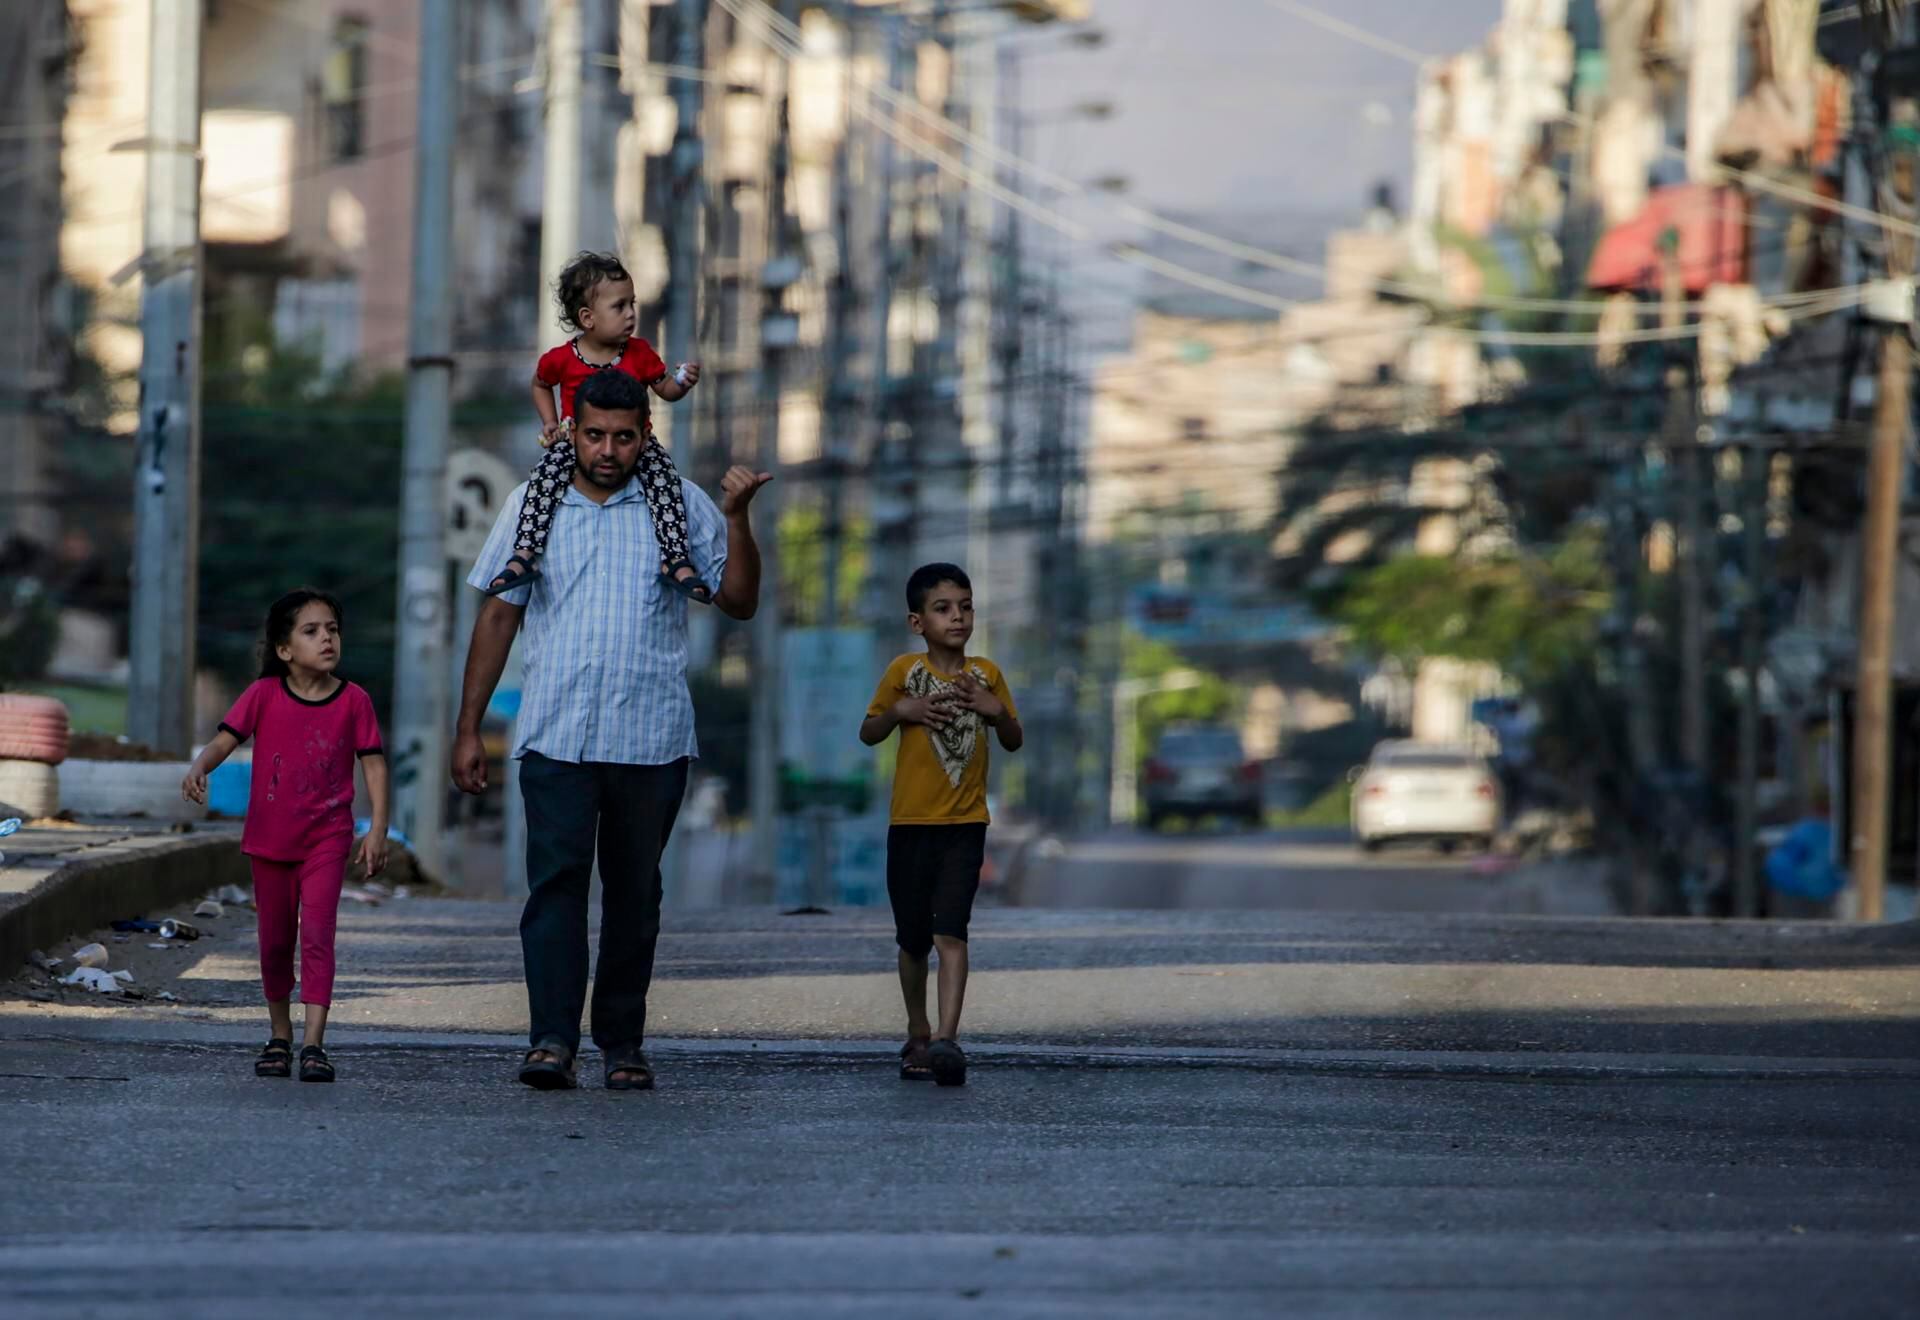 In the last 48 hours, around 600,000 Gazans managed to flee the northern part of the strip. 